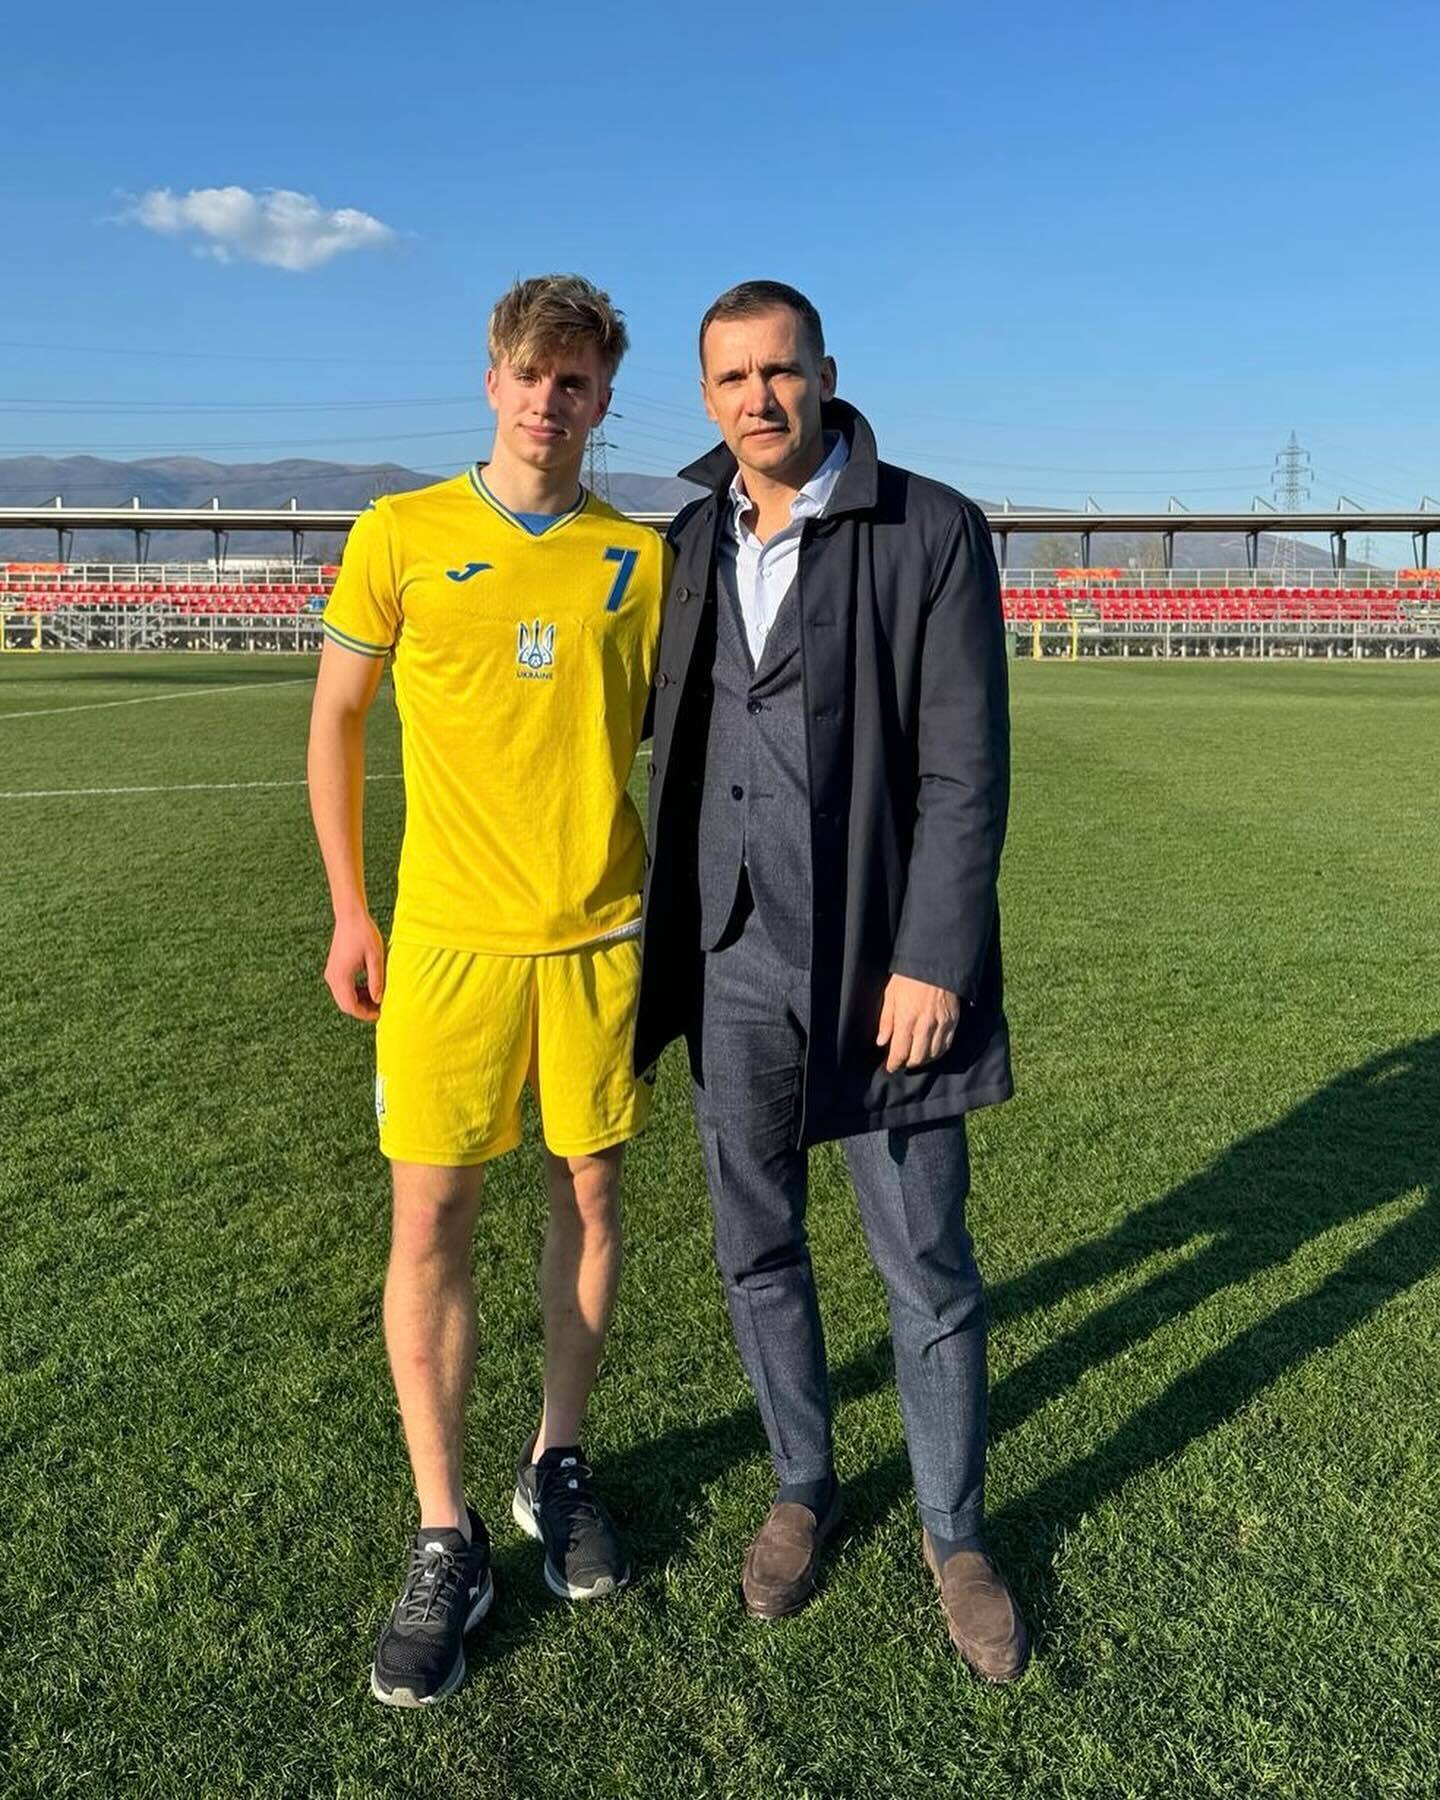 ''He does not understand Ukrainian''. It became known what is happening to Shevchenko's son in the Ukrainian national team